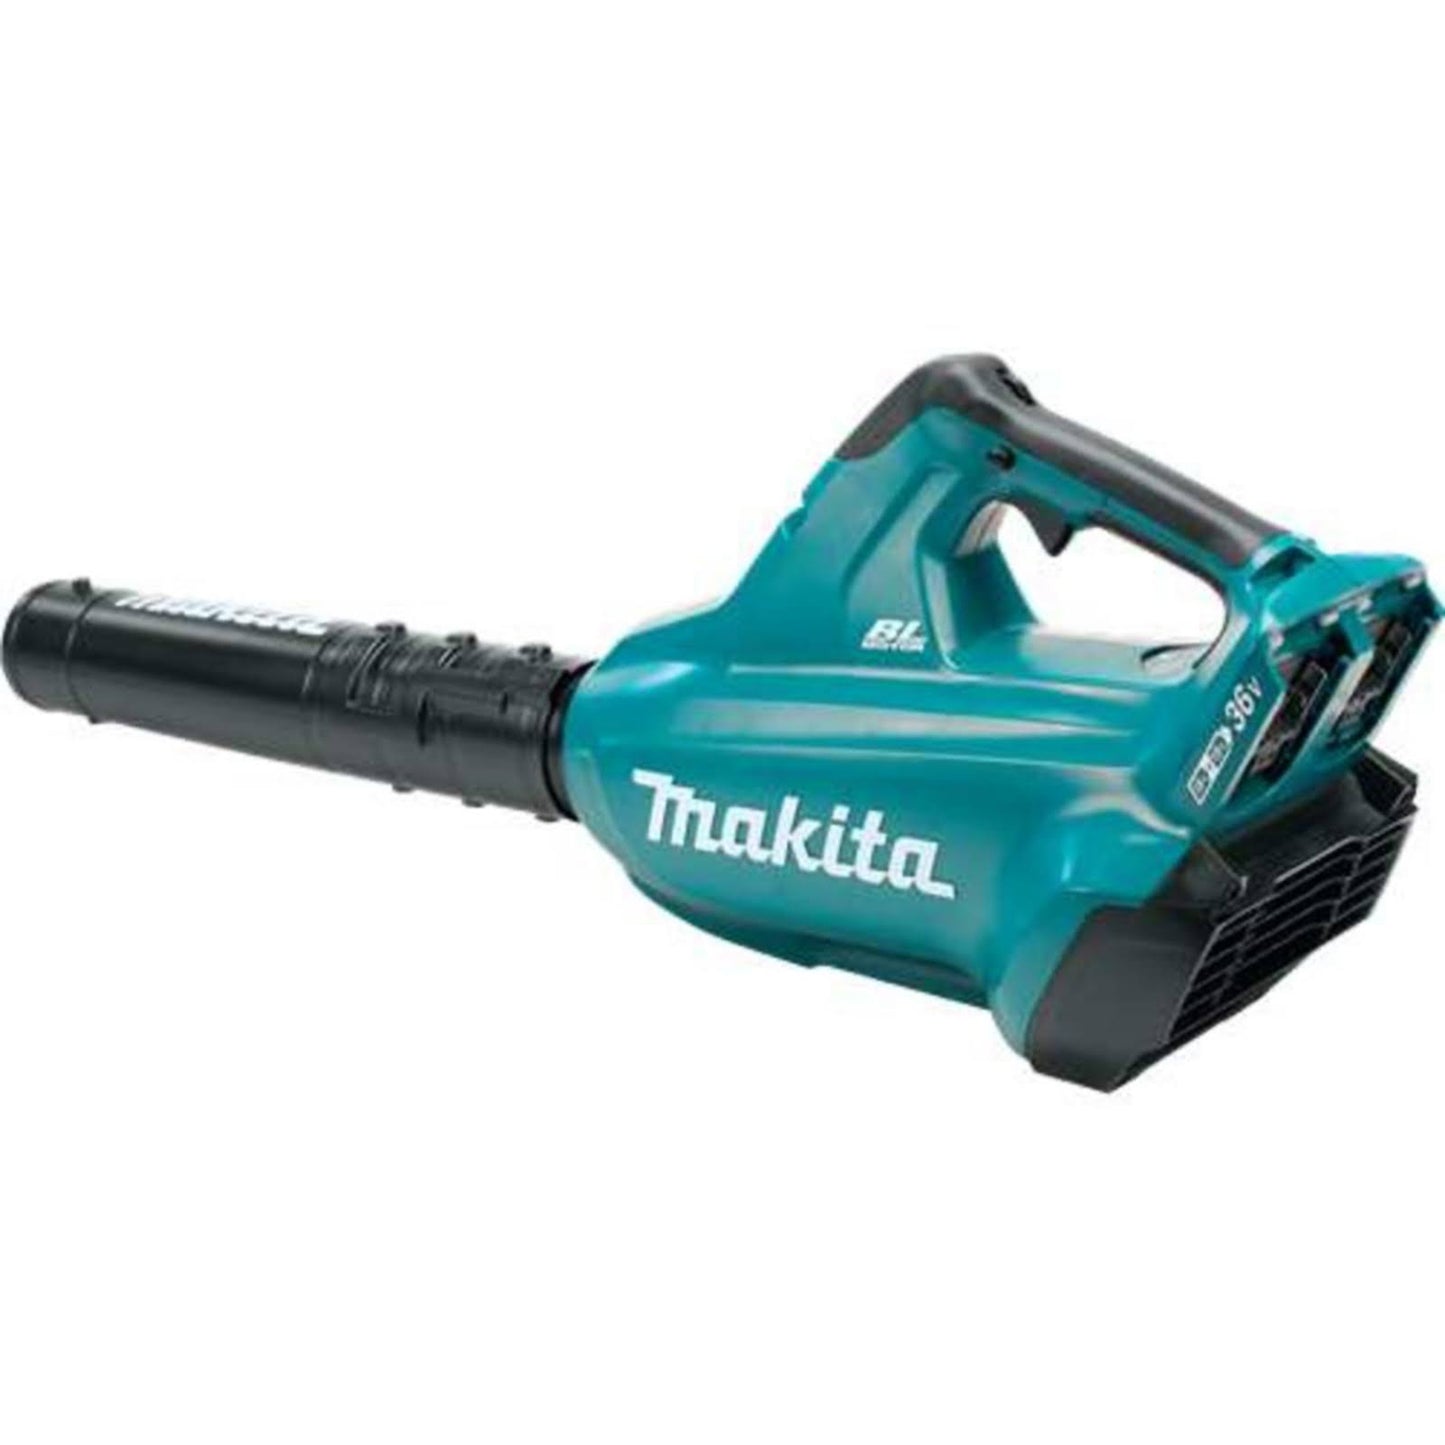 Makita 36 Volt Brushless Blower Factory Serviced (Tool Only)